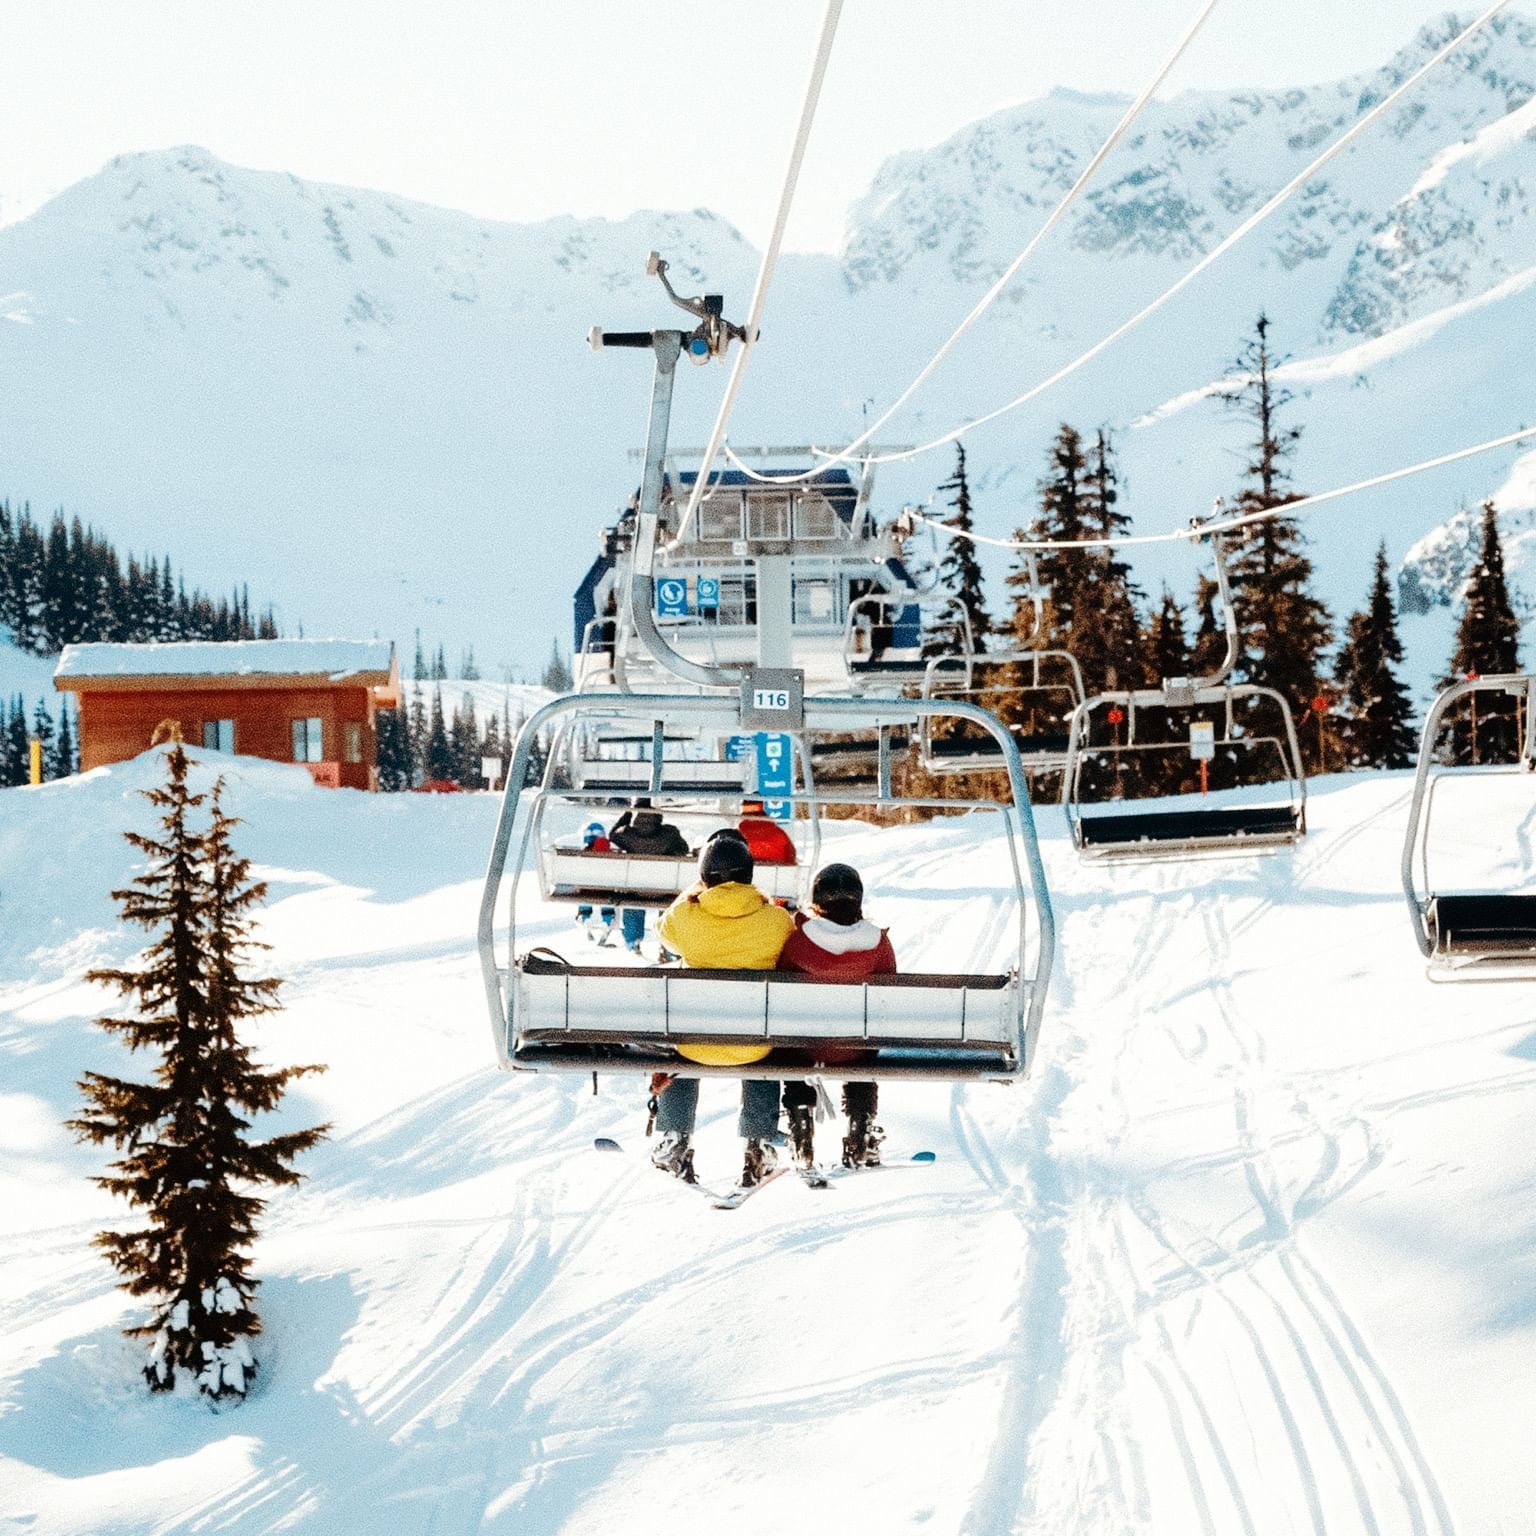 Winter-stay-and-save-offer-summit-lodge-whistler-canada